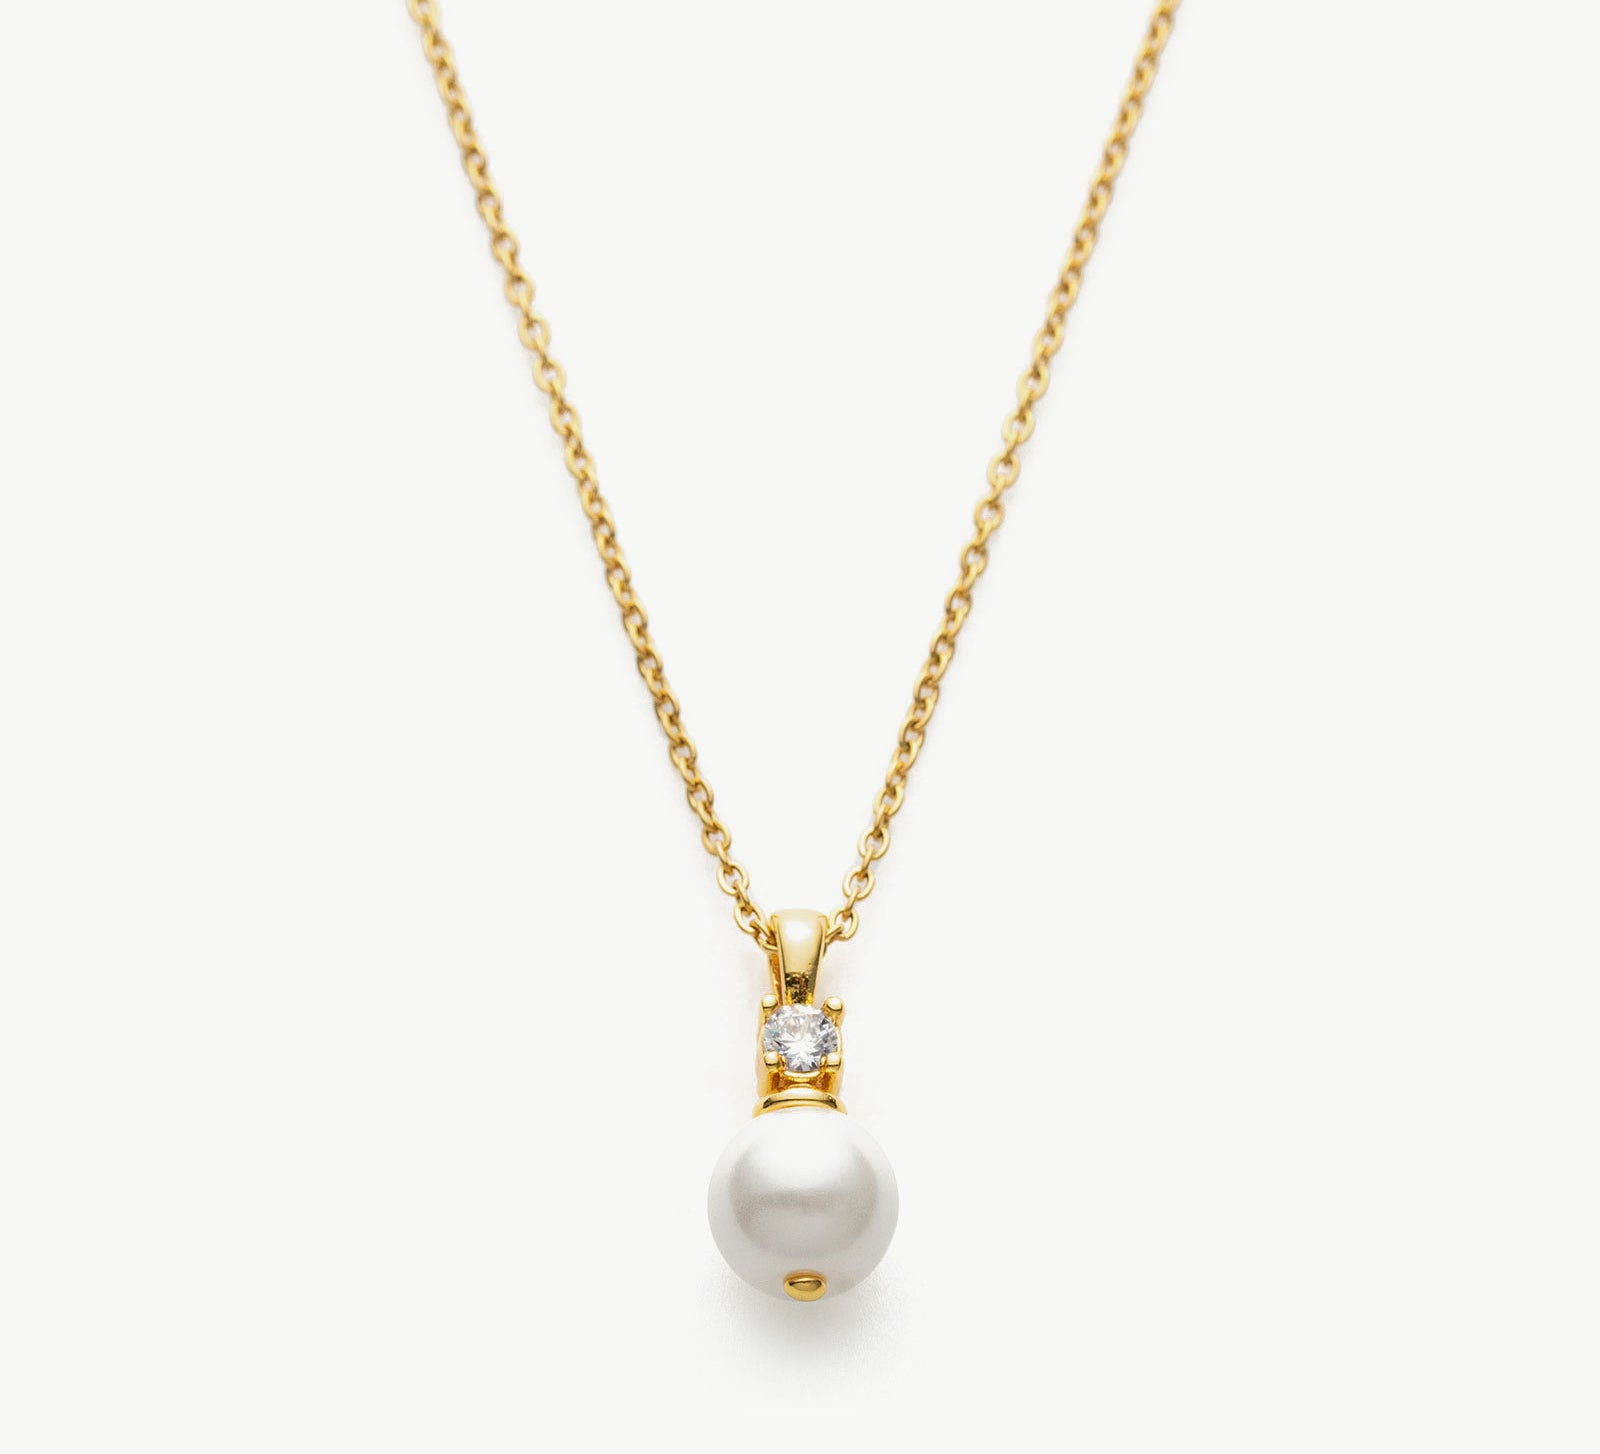 Pearl Drop Pendant Necklace in Gold, showcasing a timeless gold pendant with a lustrous pearl, adding a touch of elegance and sophistication to your neckline.